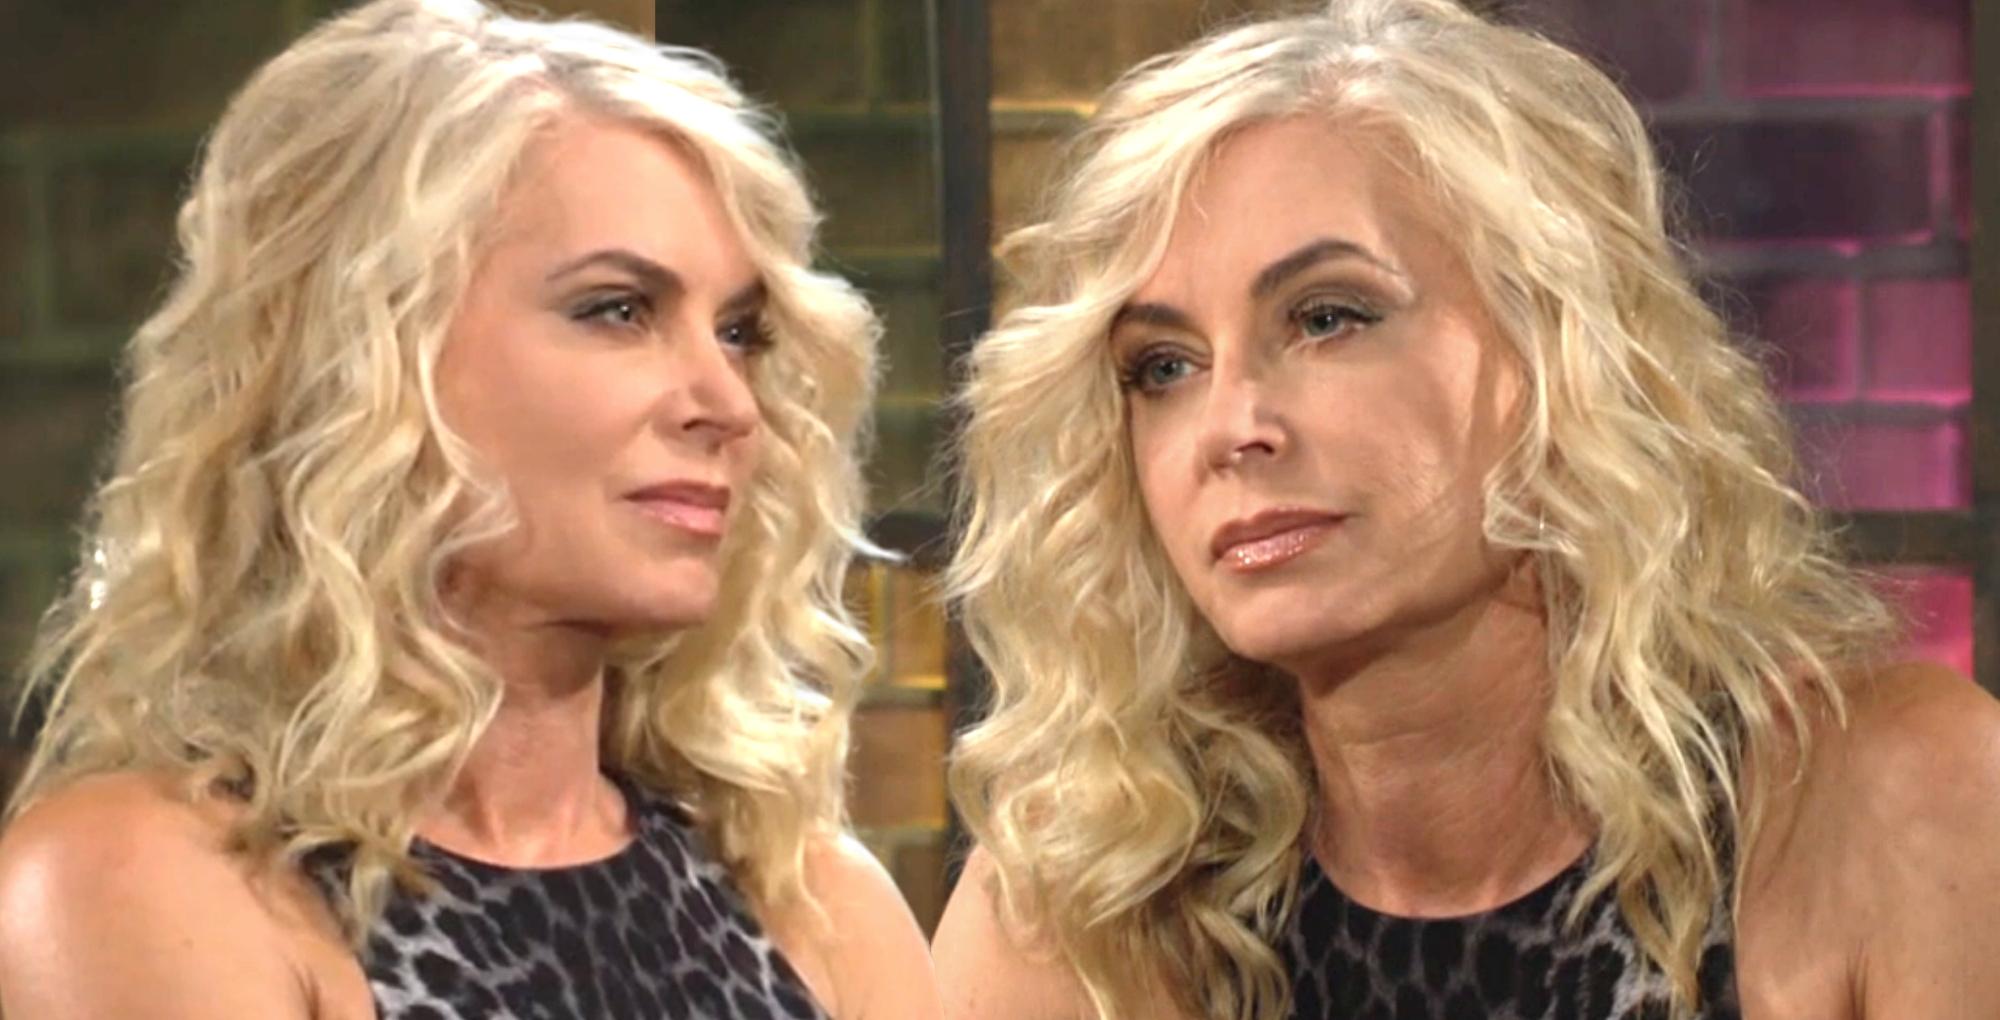 doublt ashley abbott on young and the restless.